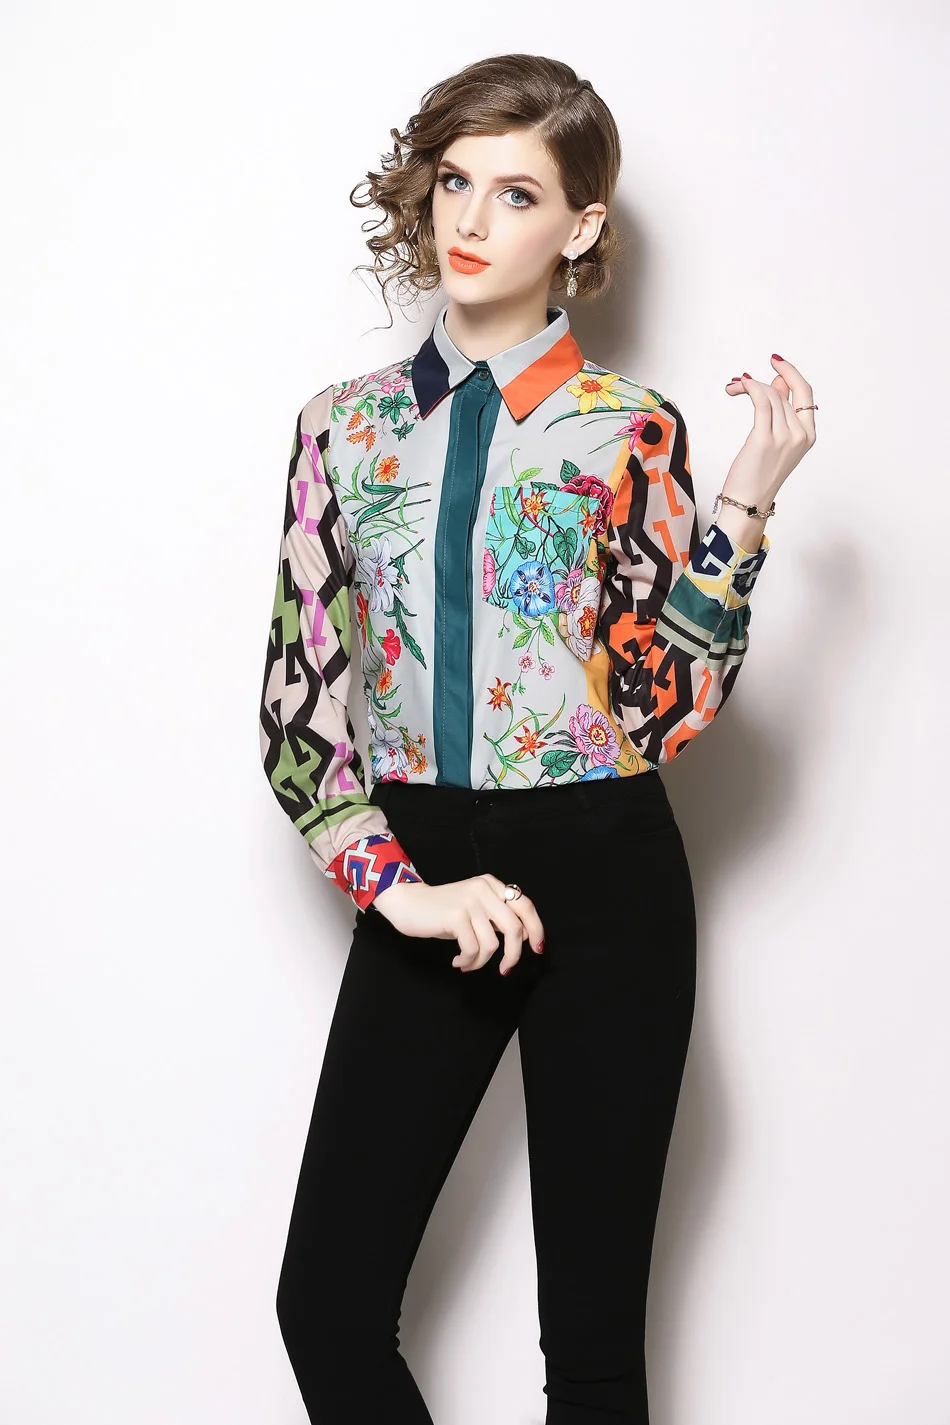 poet shirt H Han Queen Women Vintage floral Print Ladies Tops chiffon Long sleeve Casual Blouse Female Work Wear Office Shirts white blouse for women